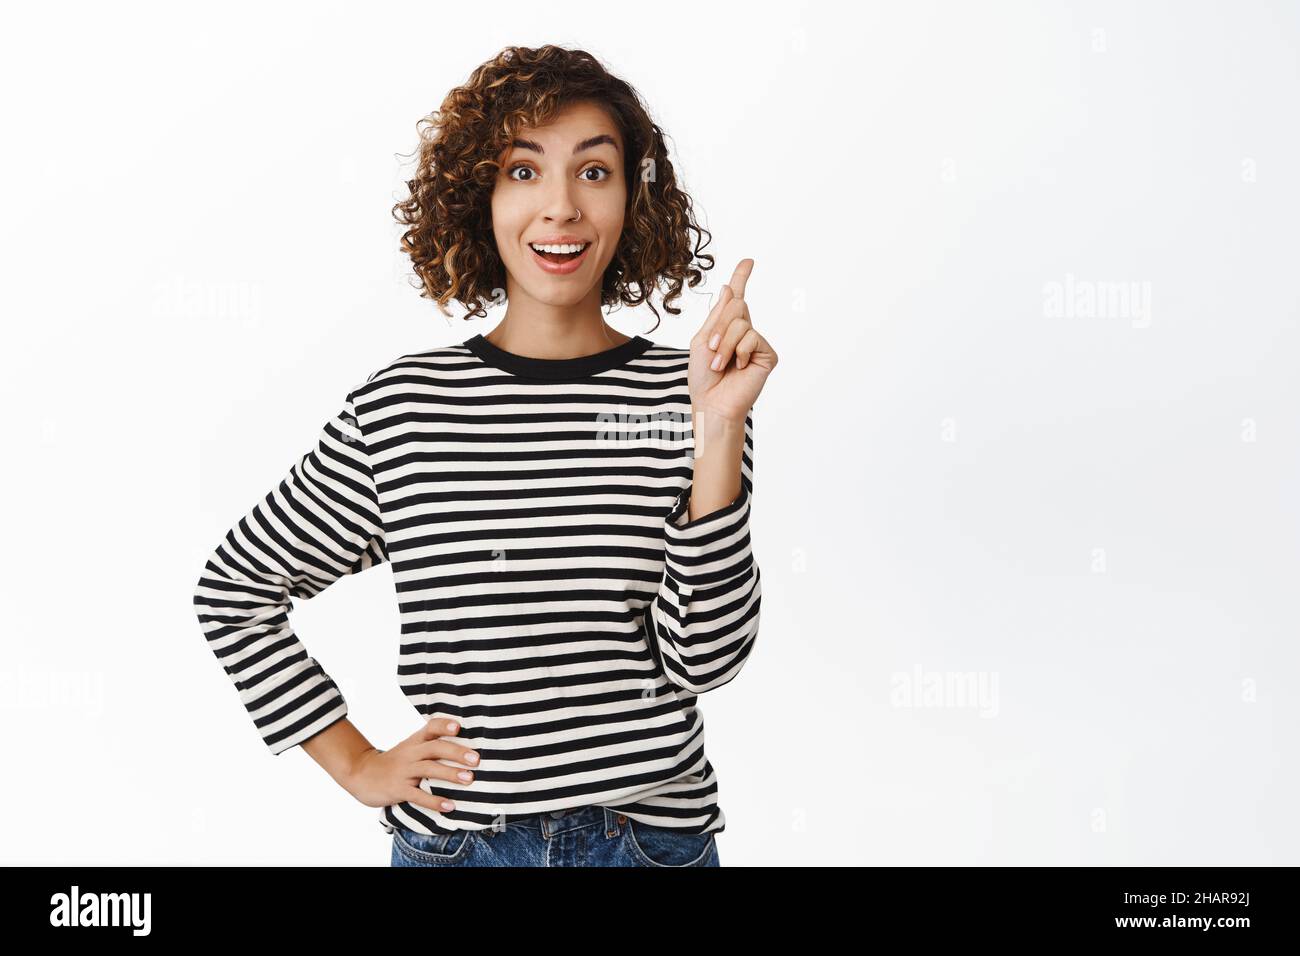 Enthusiastic middle eastern girl pointing finger up, has solution, eureka gesture, suggesting an idea or plan, standing over white background Stock Photo